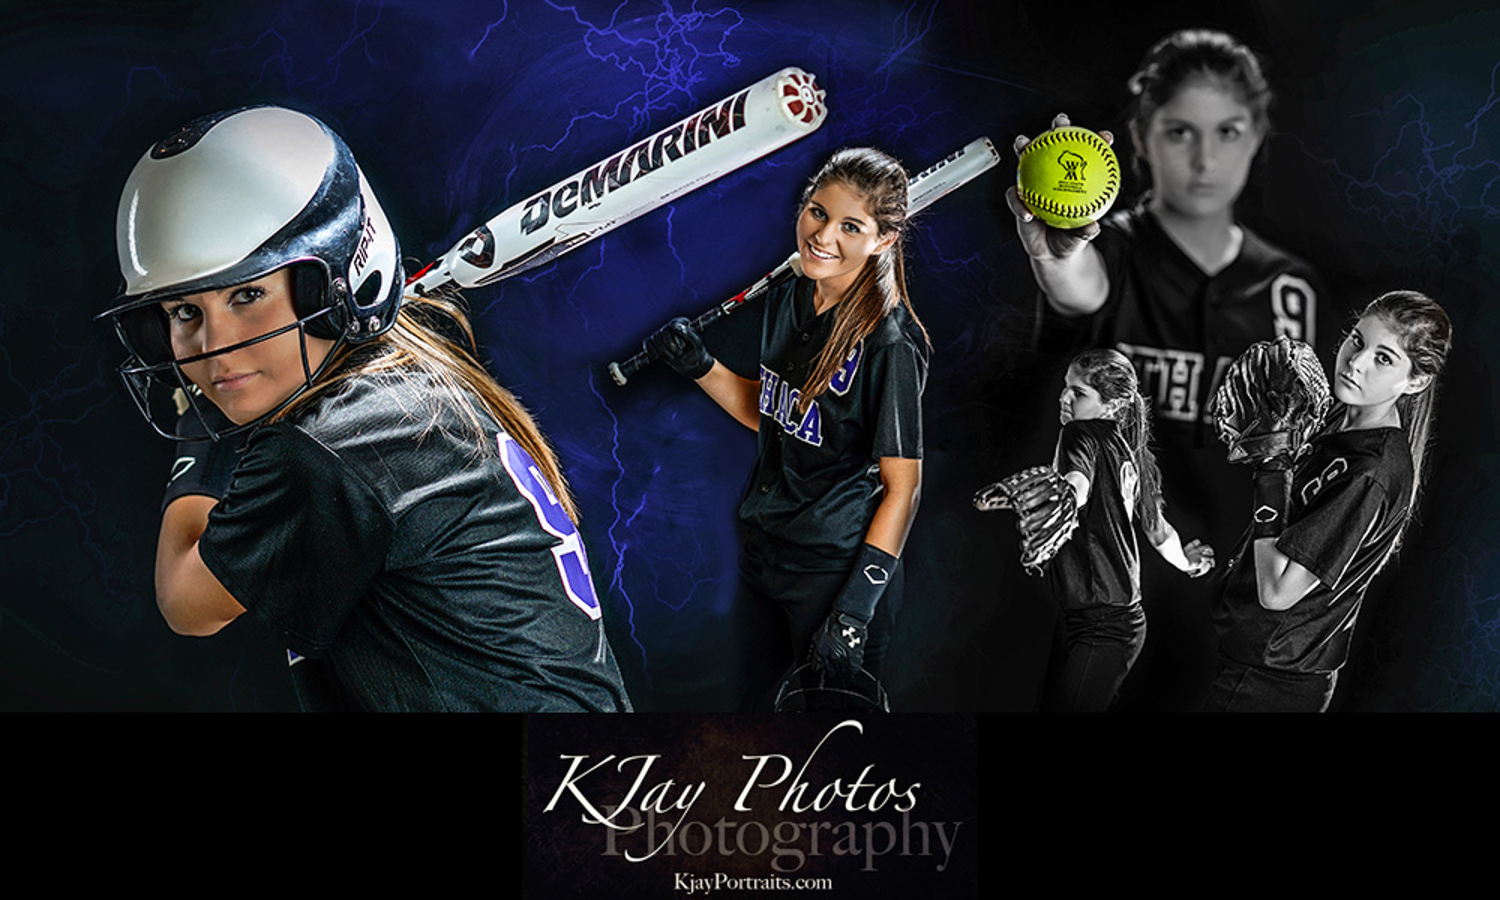 Softball senior pictures for girls.  K Jay Photos Photography, Madison WI.